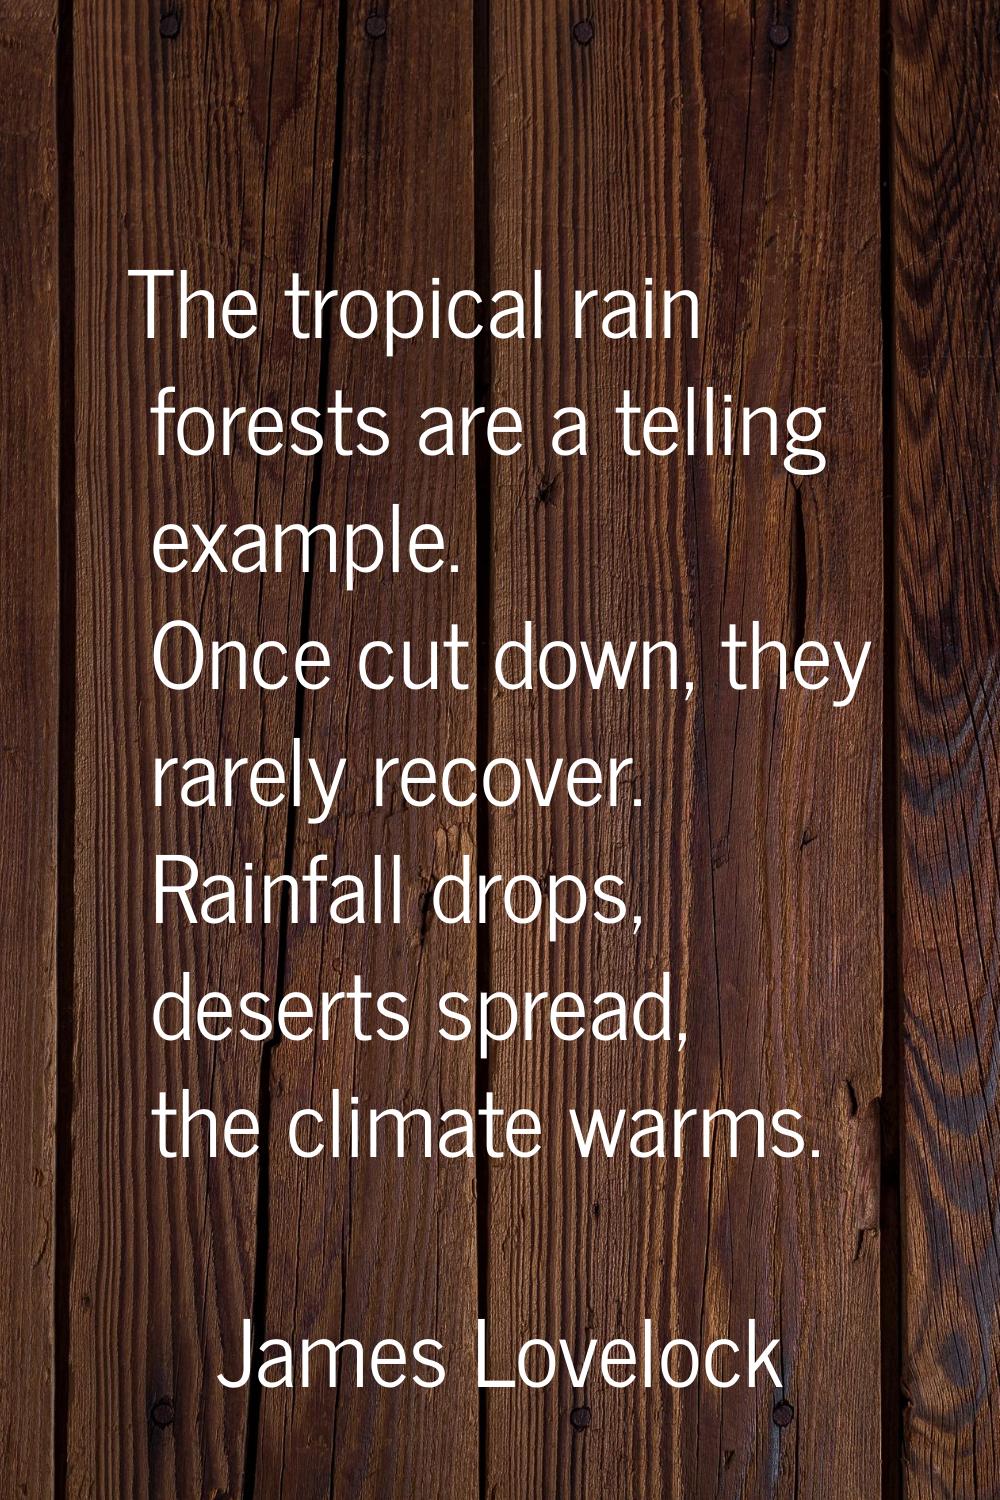 The tropical rain forests are a telling example. Once cut down, they rarely recover. Rainfall drops